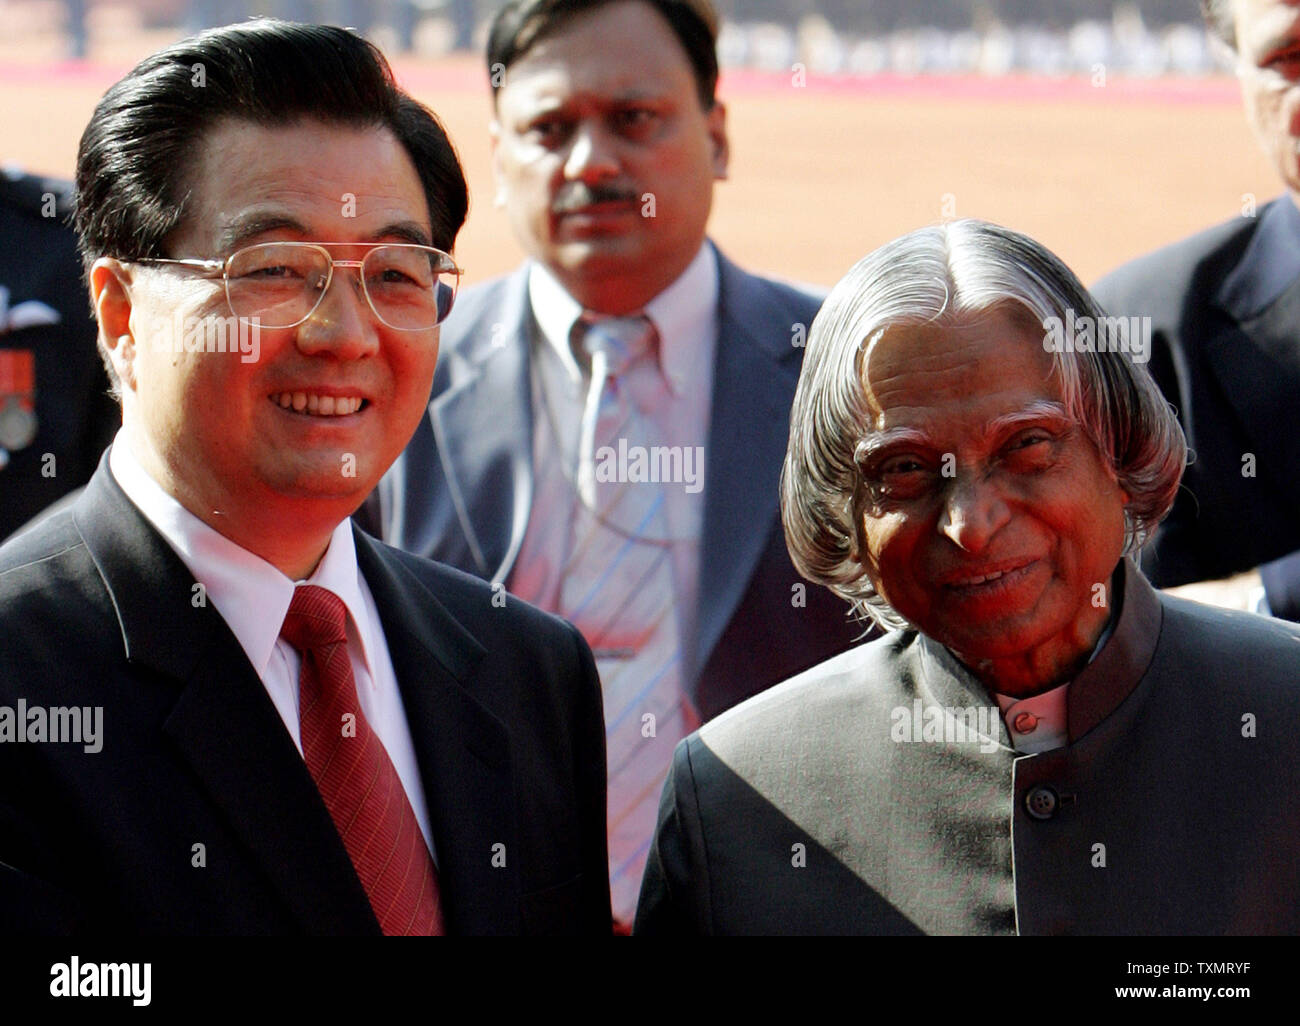 Chinese President Hu Jintao (L) shakes hands with his Indian counterpart Abdul Kalam during a welcoming ceremony in New Delhi on November 21, 2006. Hu Jintao is in India on a four-day official visit.   (UPI Photo/Kamal Kishore) Stock Photo